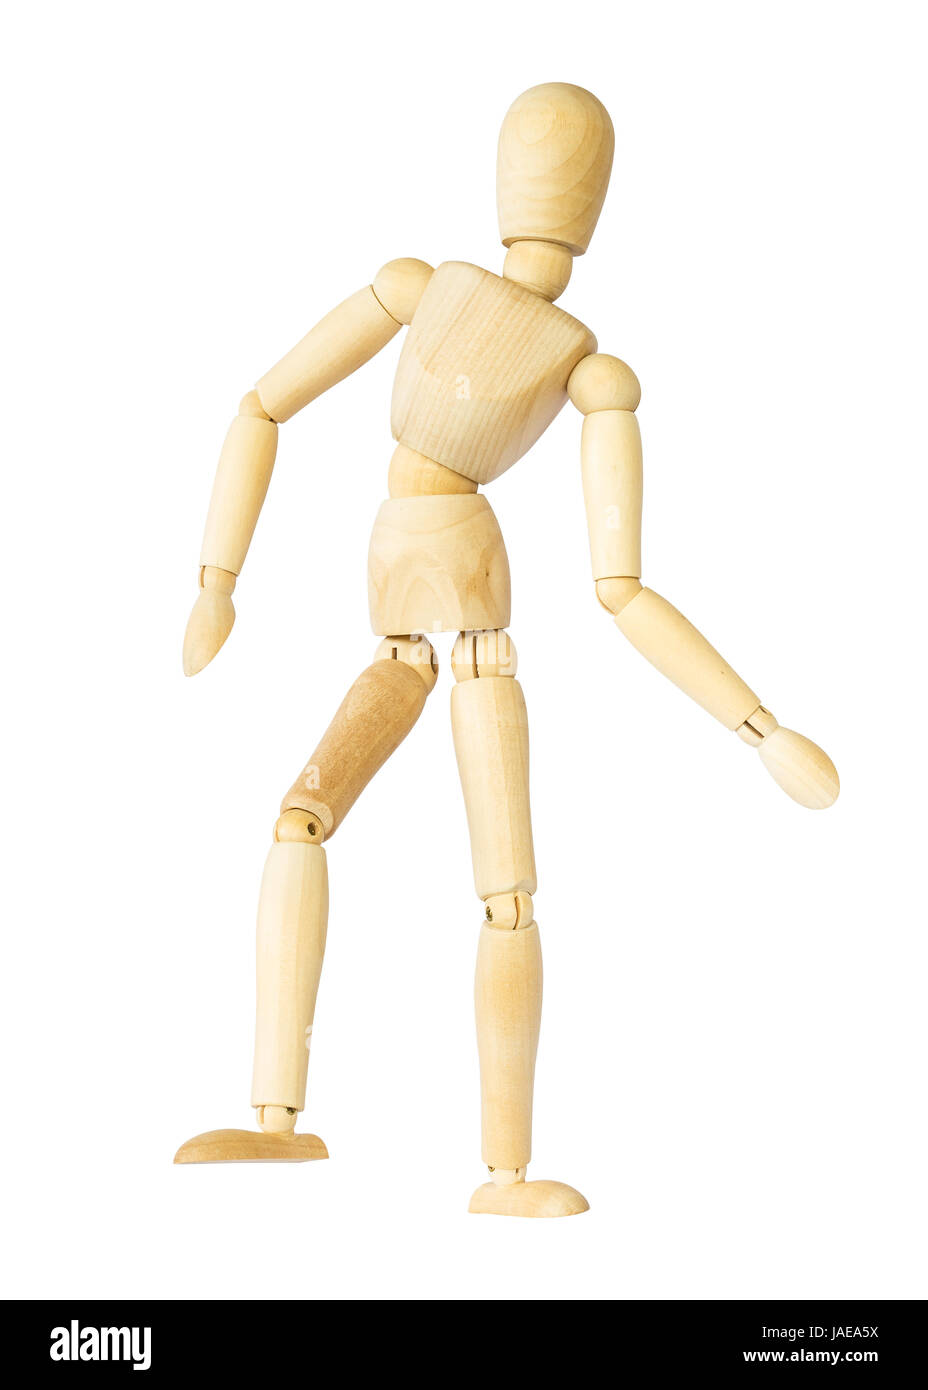 Wooden puppet is dancing . Isolated background . Stock Photo